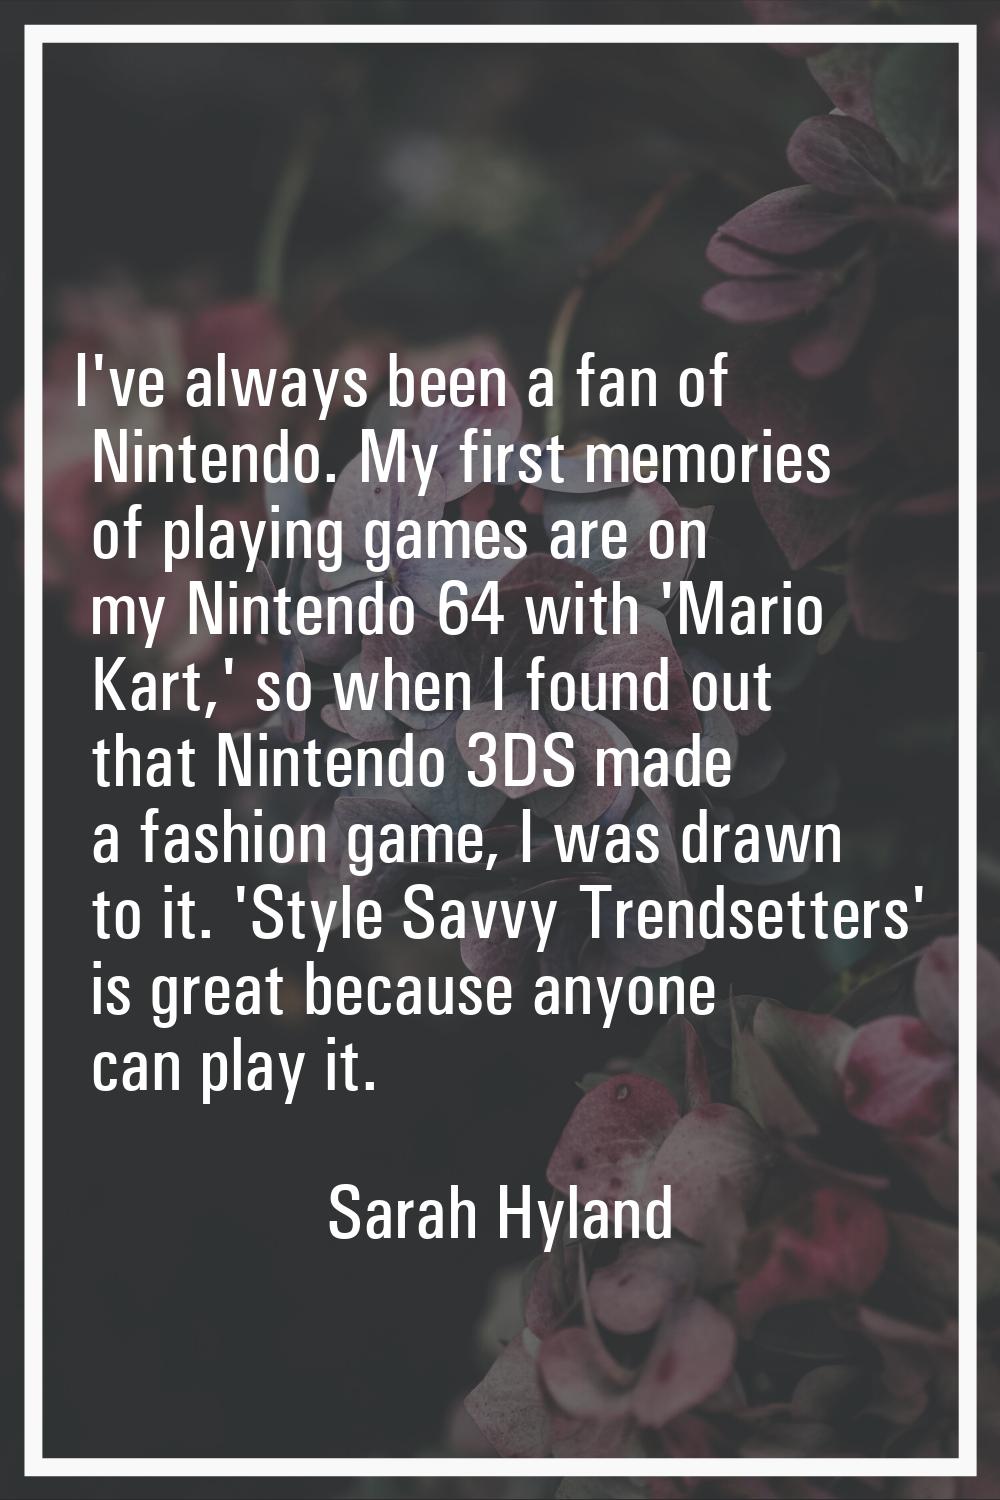 I've always been a fan of Nintendo. My first memories of playing games are on my Nintendo 64 with '